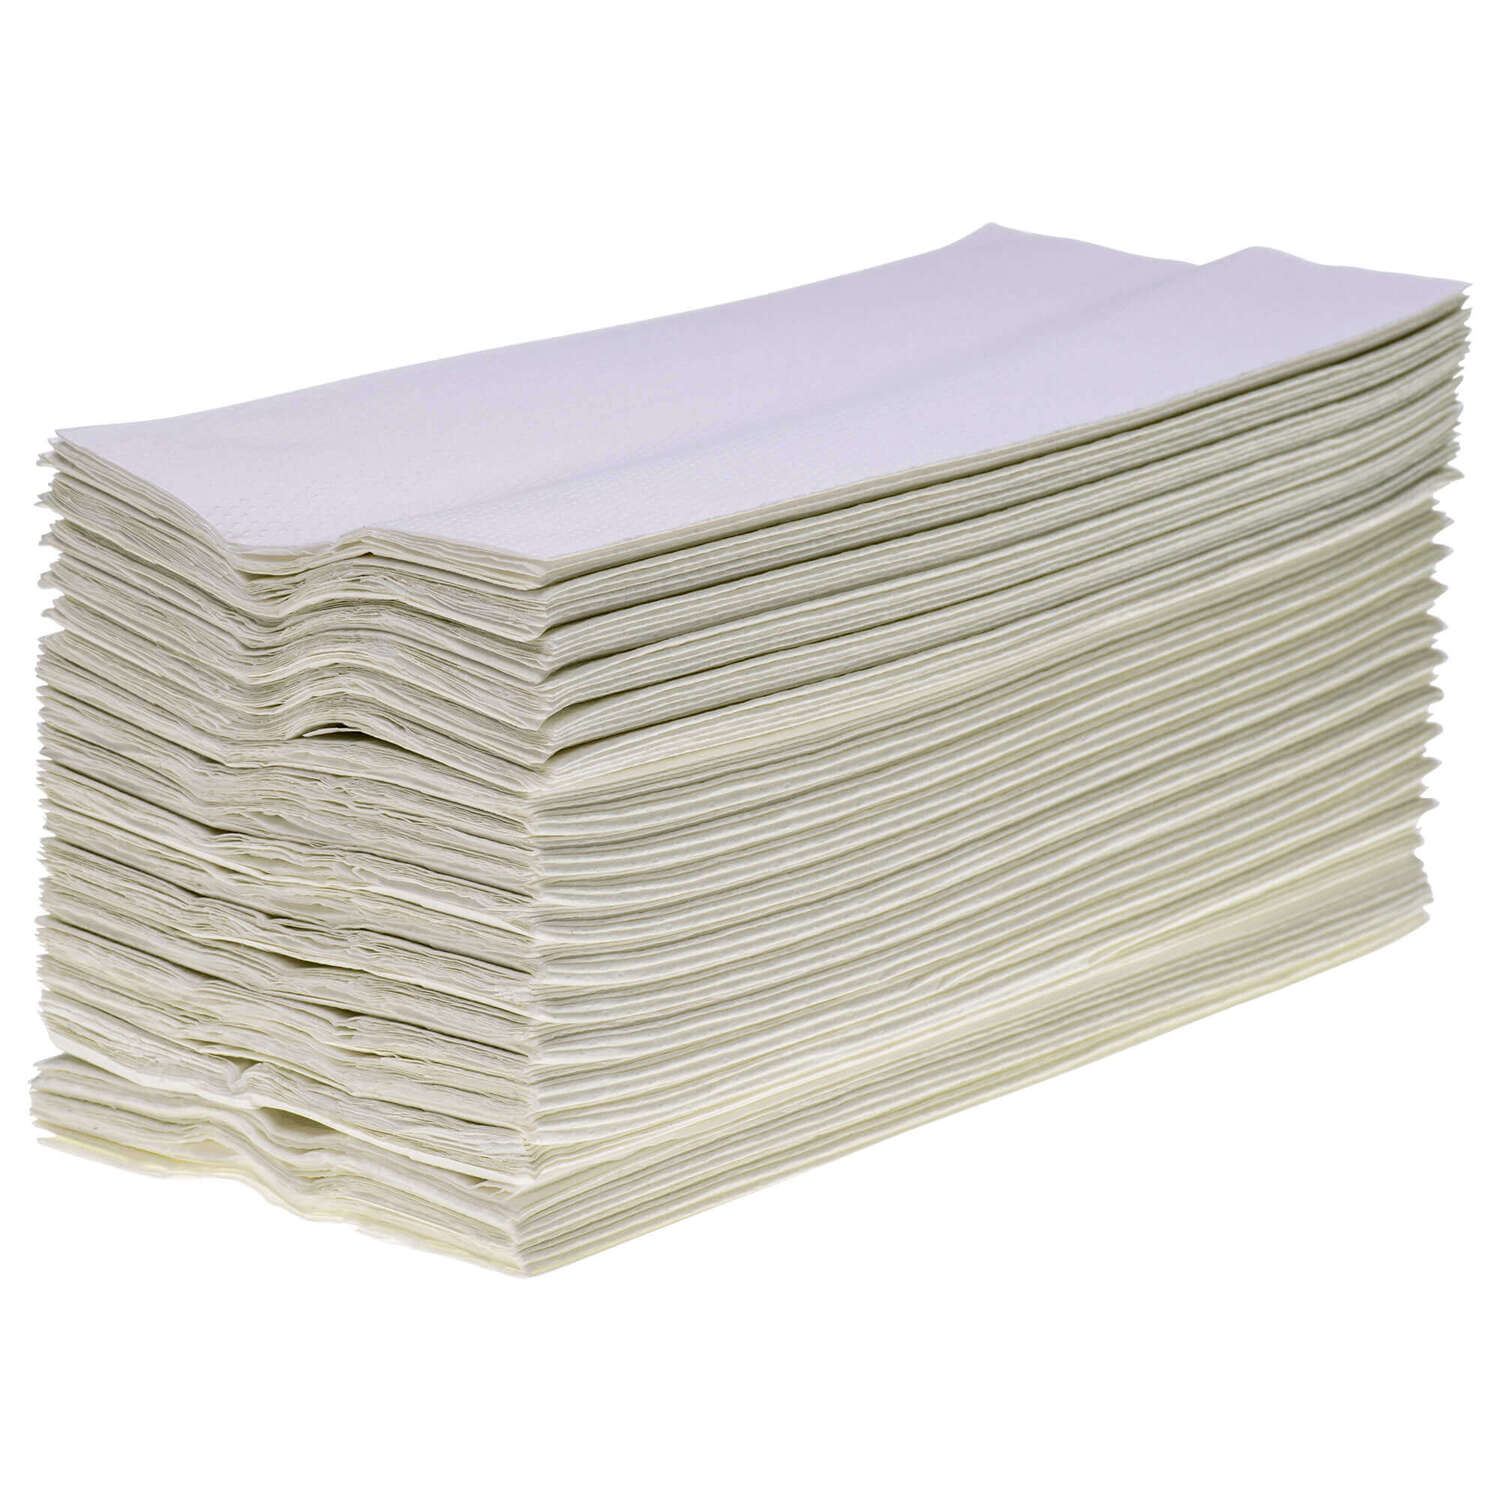 3 Cases 7200 Sheets Luxury White Multi Fold 2 Ply CFold Paper Hand Towels 